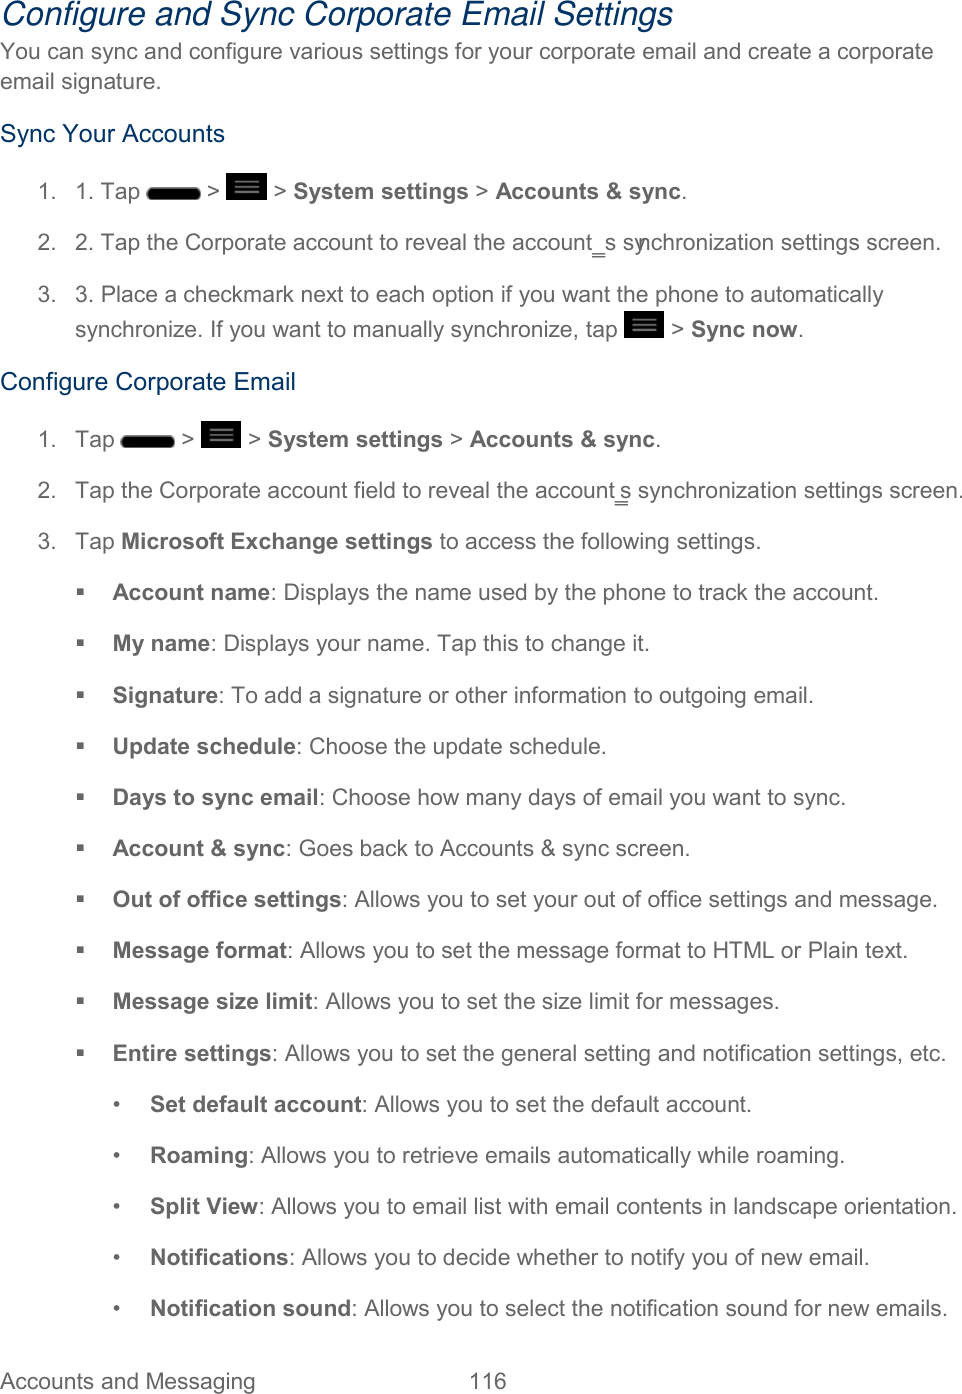  Accounts and Messaging  116   Configure and Sync Corporate Email Settings You can sync and configure various settings for your corporate email and create a corporate email signature. Sync Your Accounts 1.  1. Tap   &gt;   &gt; System settings &gt; Accounts &amp; sync. 2.  2. Tap the Corporate account to reveal the account‗s synchronization settings screen. 3.  3. Place a checkmark next to each option if you want the phone to automatically synchronize. If you want to manually synchronize, tap   &gt; Sync now. Configure Corporate Email 1.  Tap   &gt;   &gt; System settings &gt; Accounts &amp; sync. 2.  Tap the Corporate account field to reveal the account‗s synchronization settings screen. 3.  Tap Microsoft Exchange settings to access the following settings.  Account name: Displays the name used by the phone to track the account.  My name: Displays your name. Tap this to change it.  Signature: To add a signature or other information to outgoing email.  Update schedule: Choose the update schedule.  Days to sync email: Choose how many days of email you want to sync.  Account &amp; sync: Goes back to Accounts &amp; sync screen.  Out of office settings: Allows you to set your out of office settings and message.  Message format: Allows you to set the message format to HTML or Plain text.  Message size limit: Allows you to set the size limit for messages.  Entire settings: Allows you to set the general setting and notification settings, etc. •  Set default account: Allows you to set the default account. •  Roaming: Allows you to retrieve emails automatically while roaming. •  Split View: Allows you to email list with email contents in landscape orientation. •  Notifications: Allows you to decide whether to notify you of new email. •  Notification sound: Allows you to select the notification sound for new emails. 